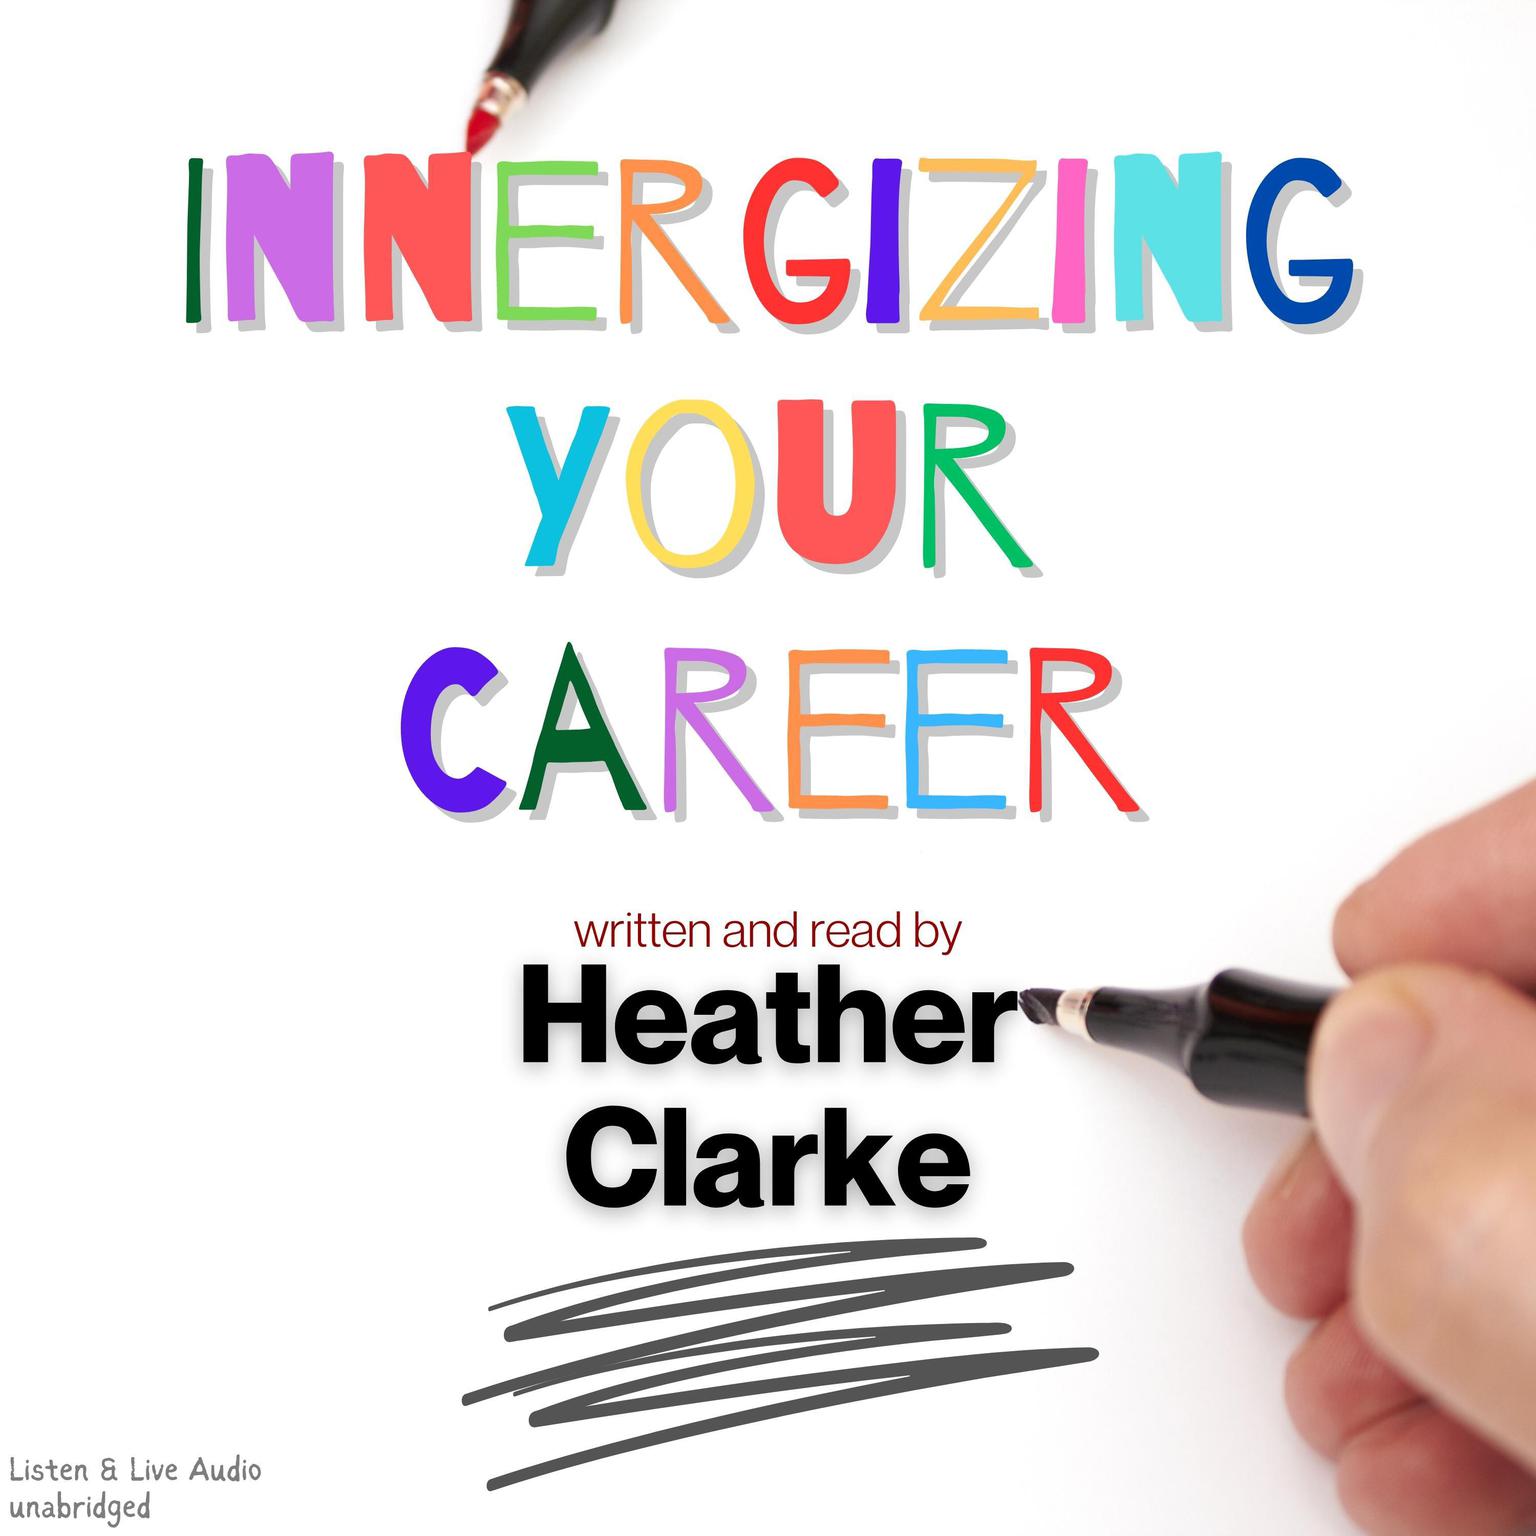 Innergizing Your Career Audiobook, by Heather Clarke